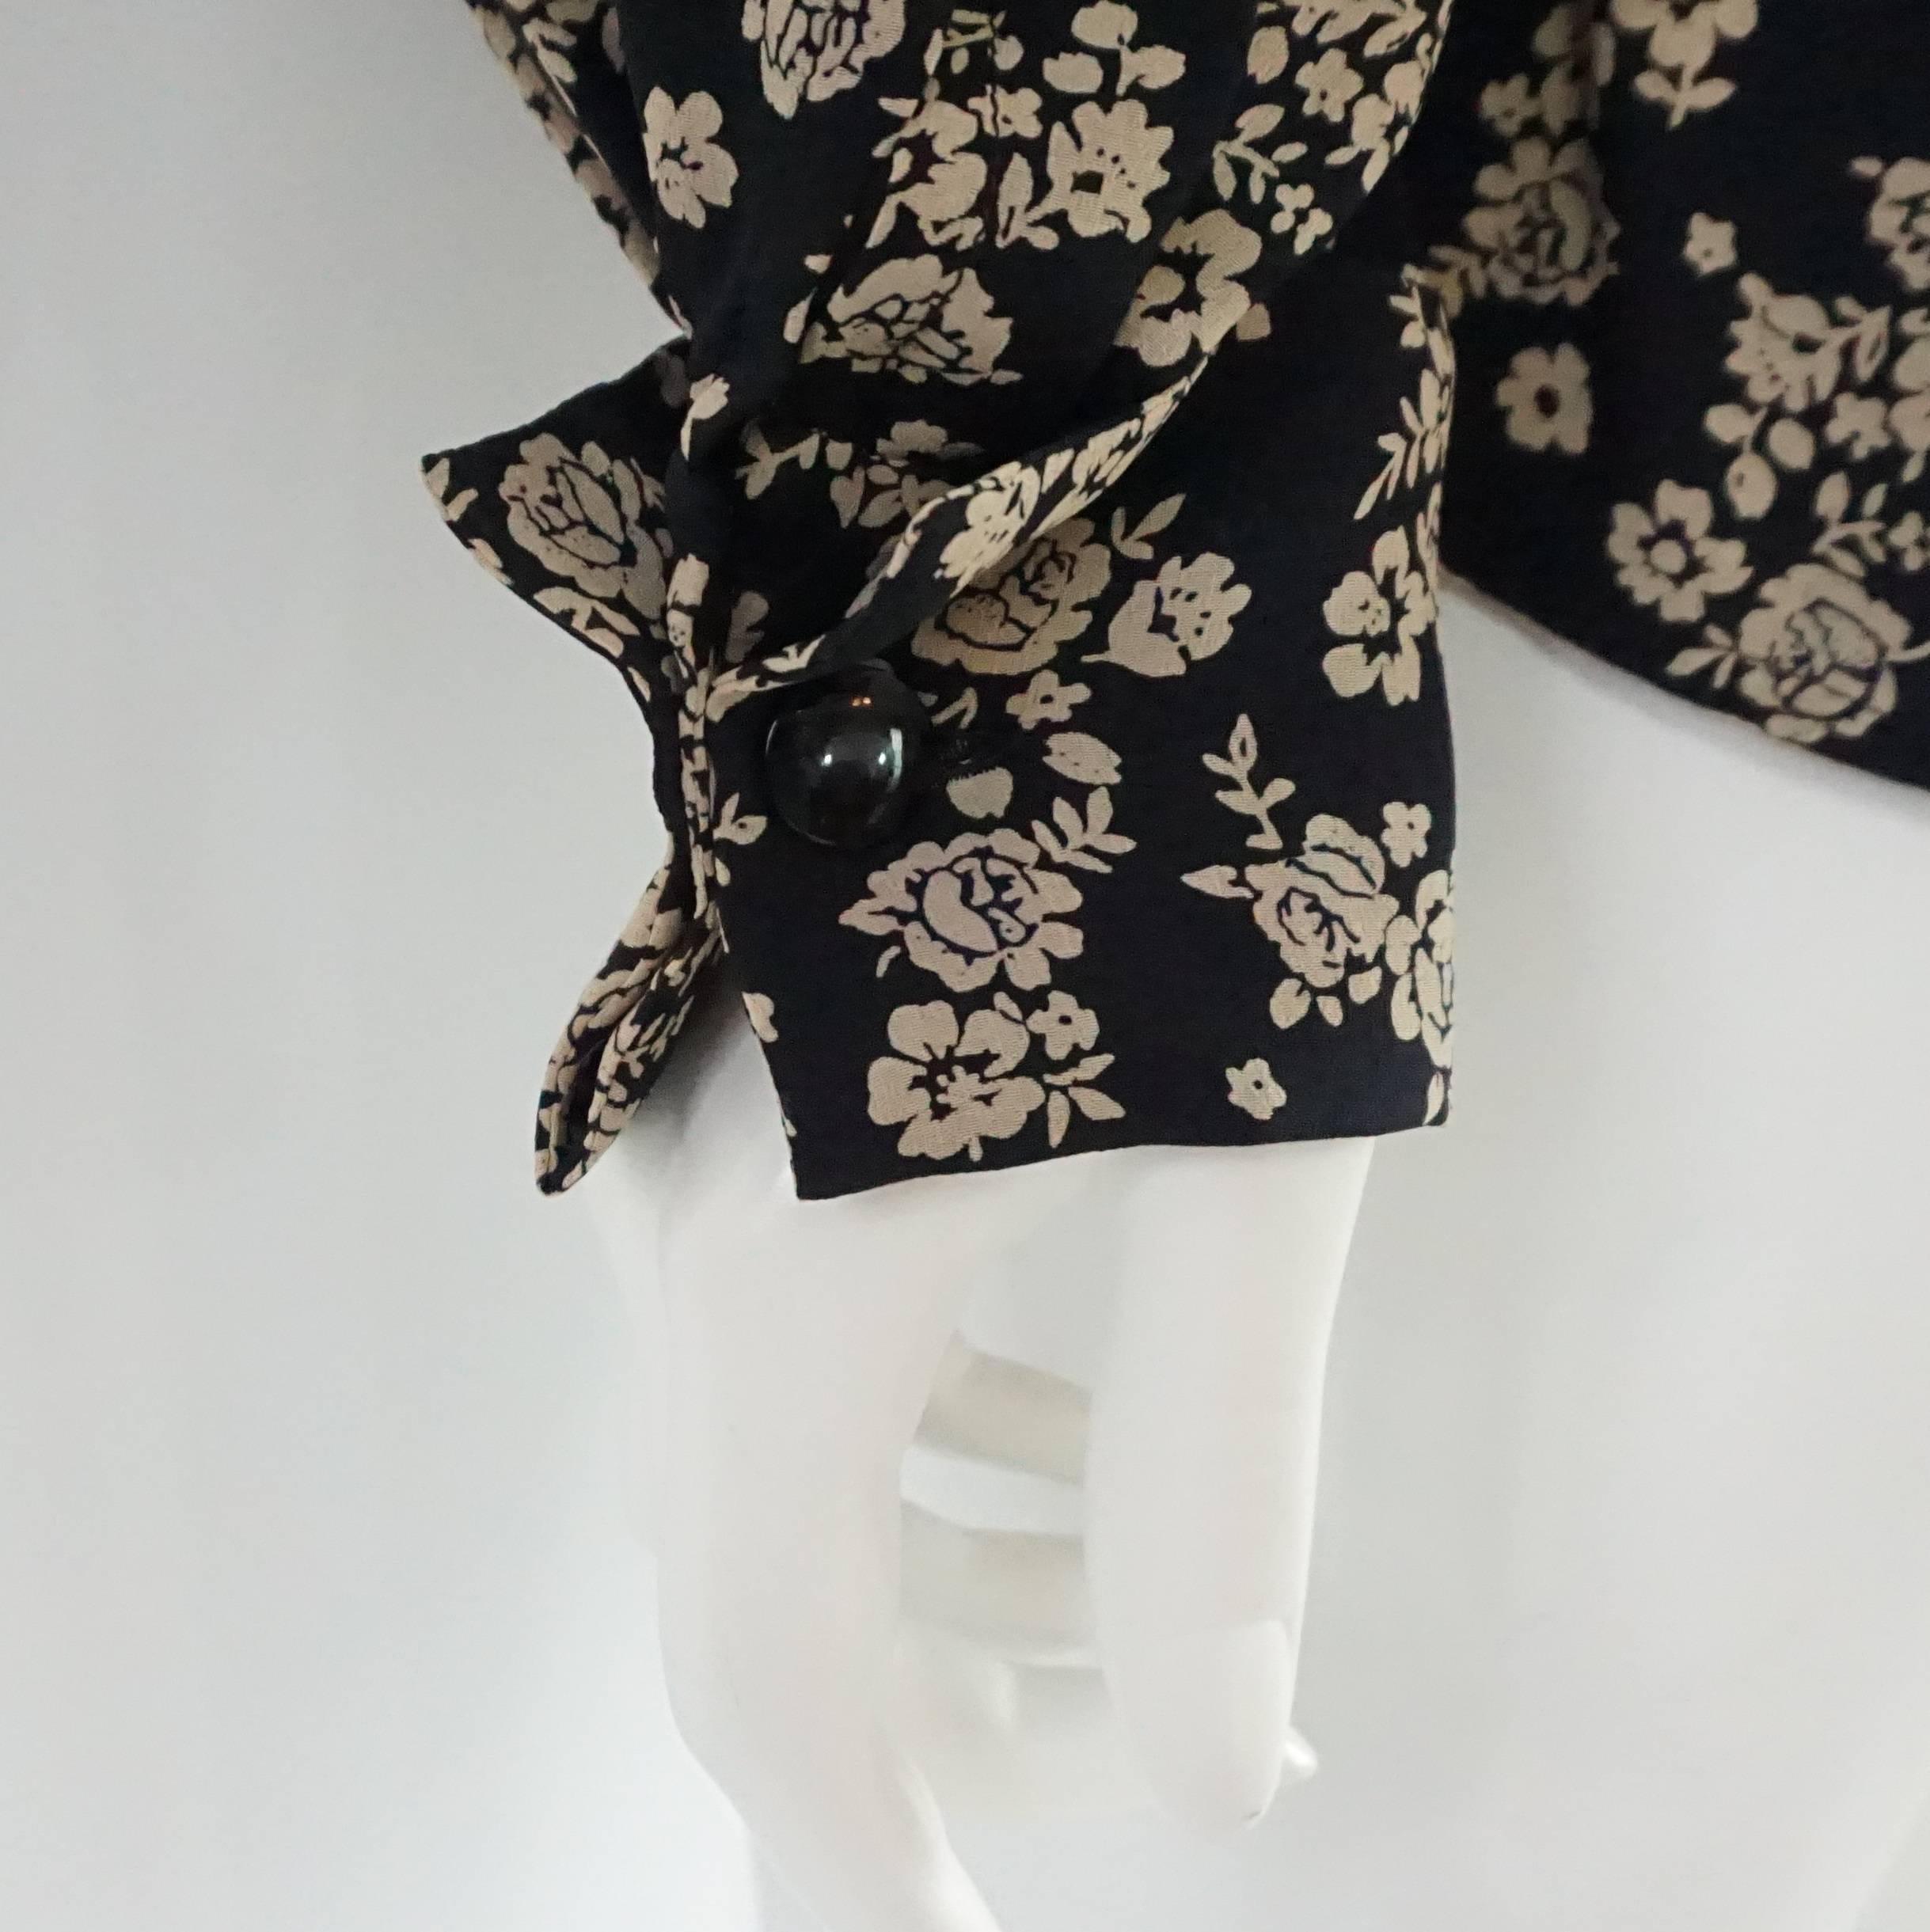 Women's Valentino Black and Tan Floral Blouse with Cuff Links - L - 1980's 